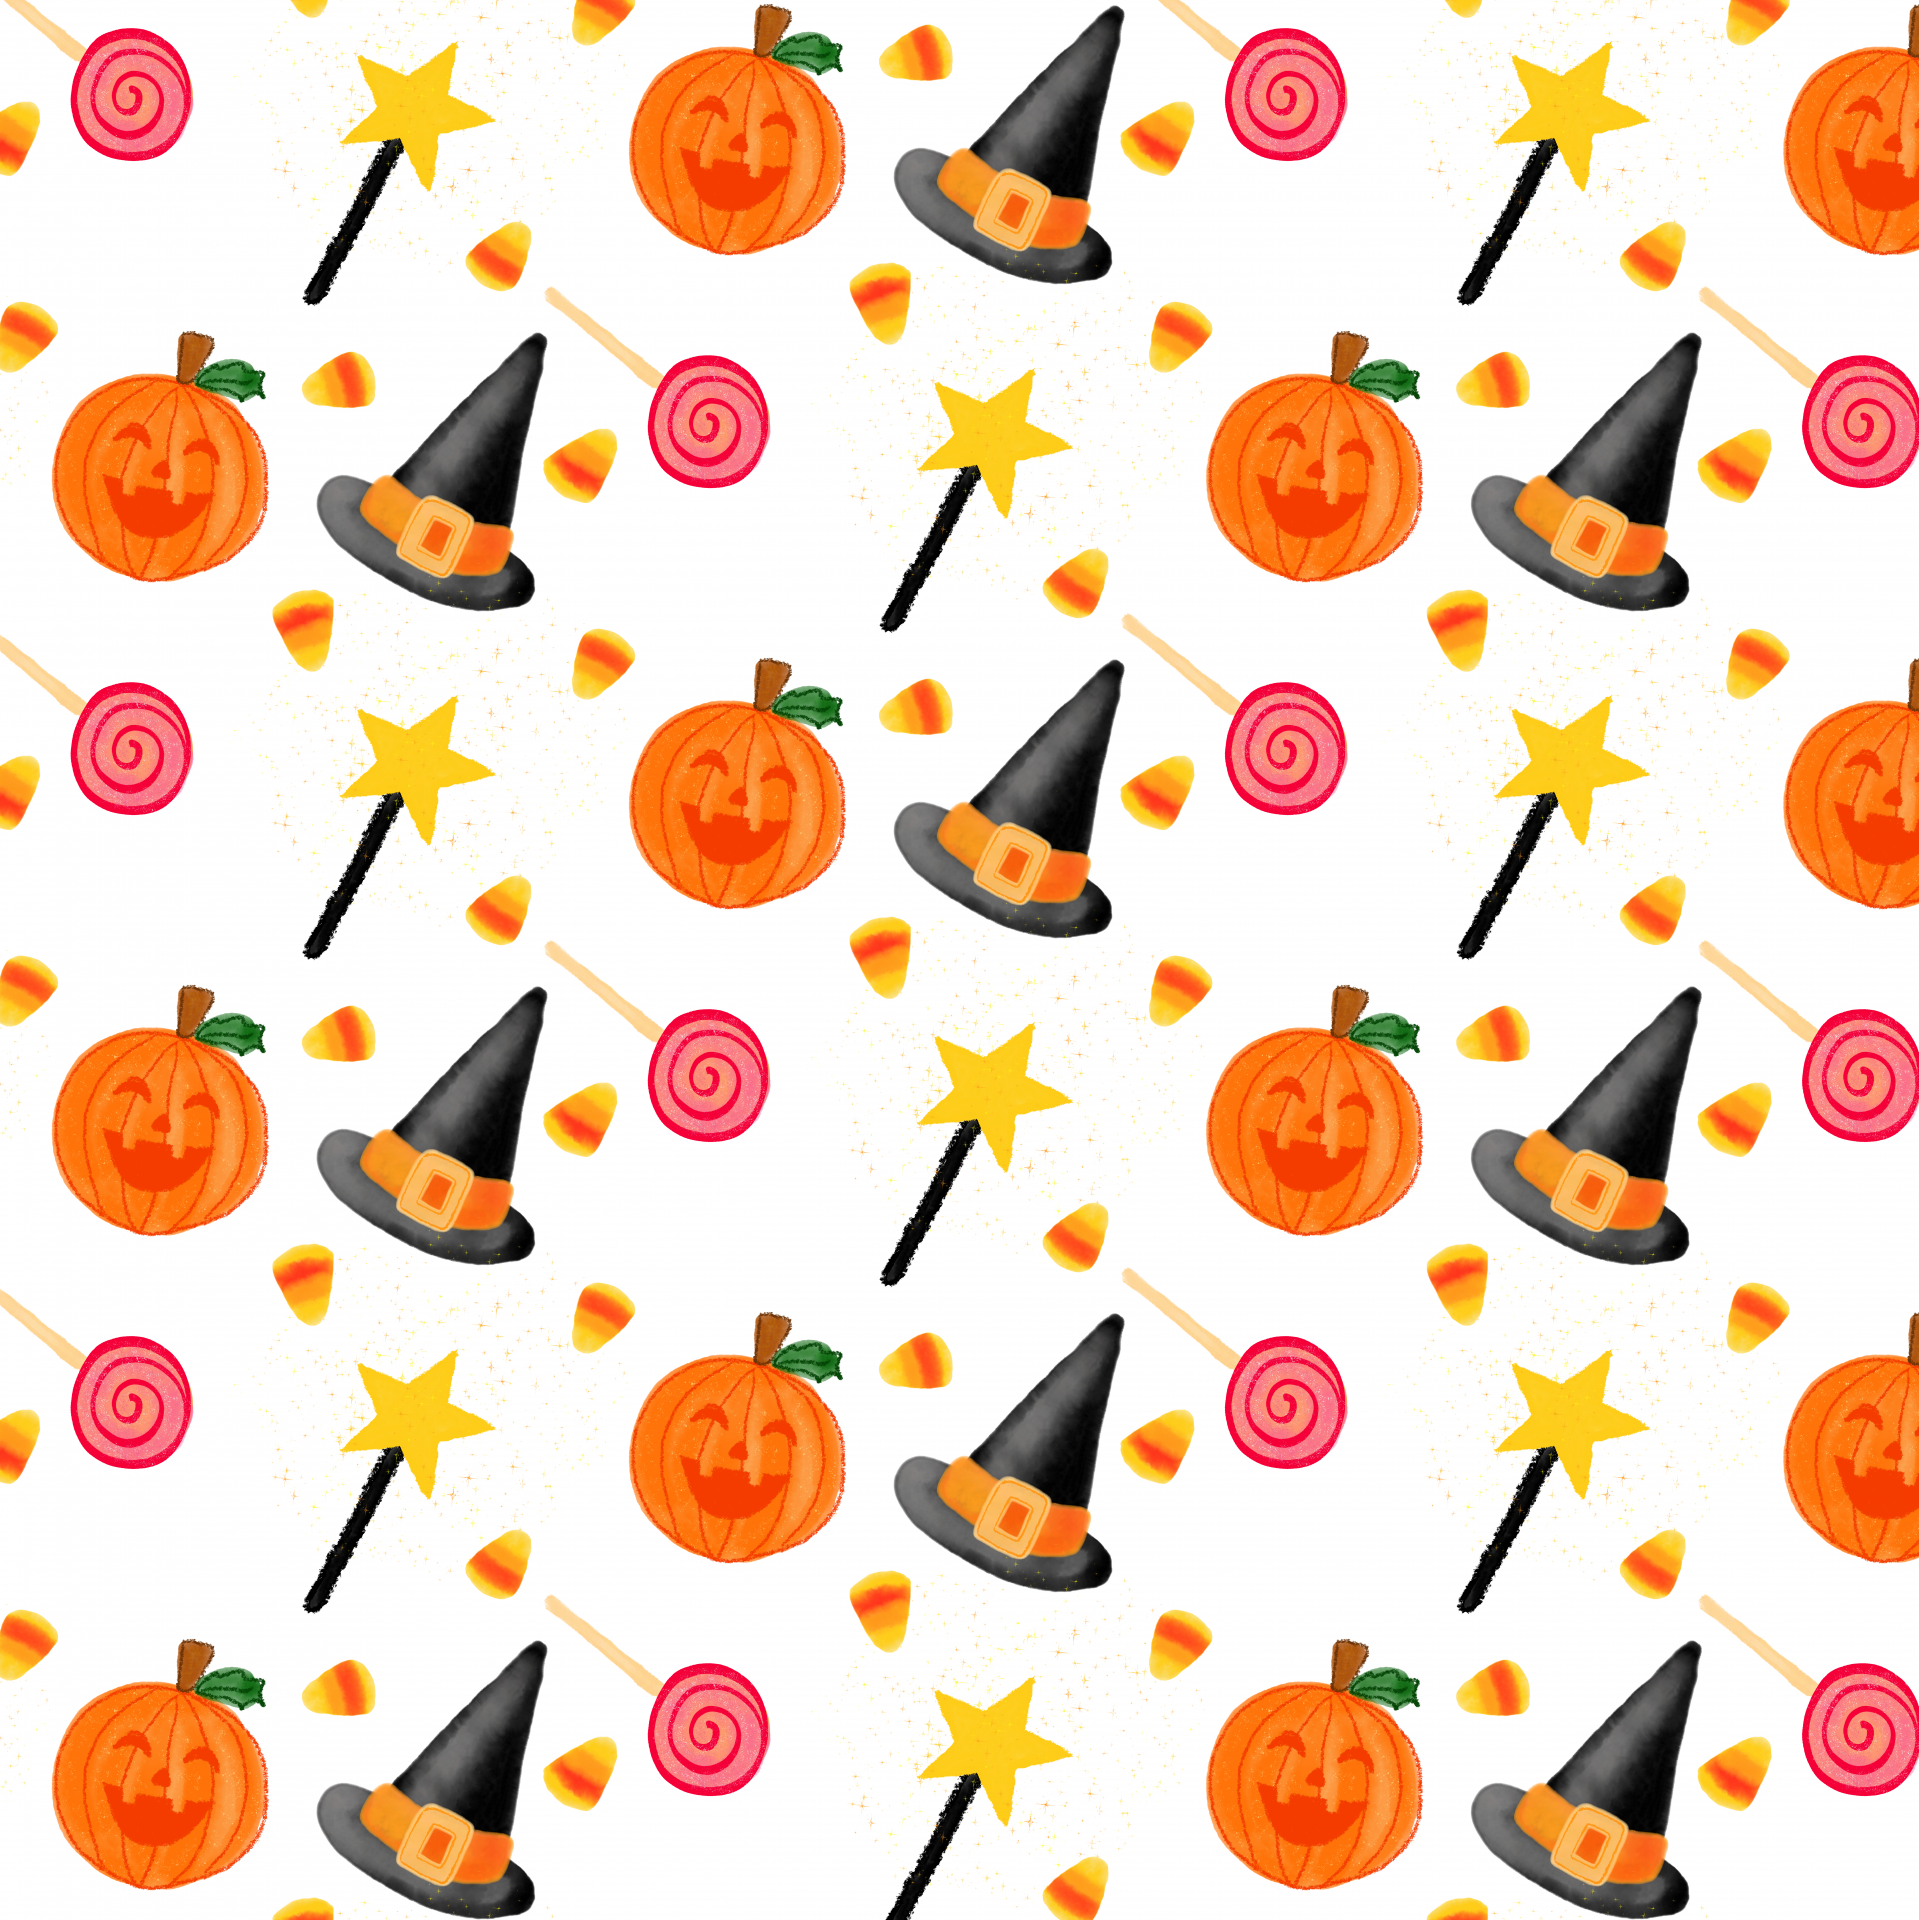 Halloween watercolor background illustration with pumpkins, witches' hats, wands, lollipops and corn